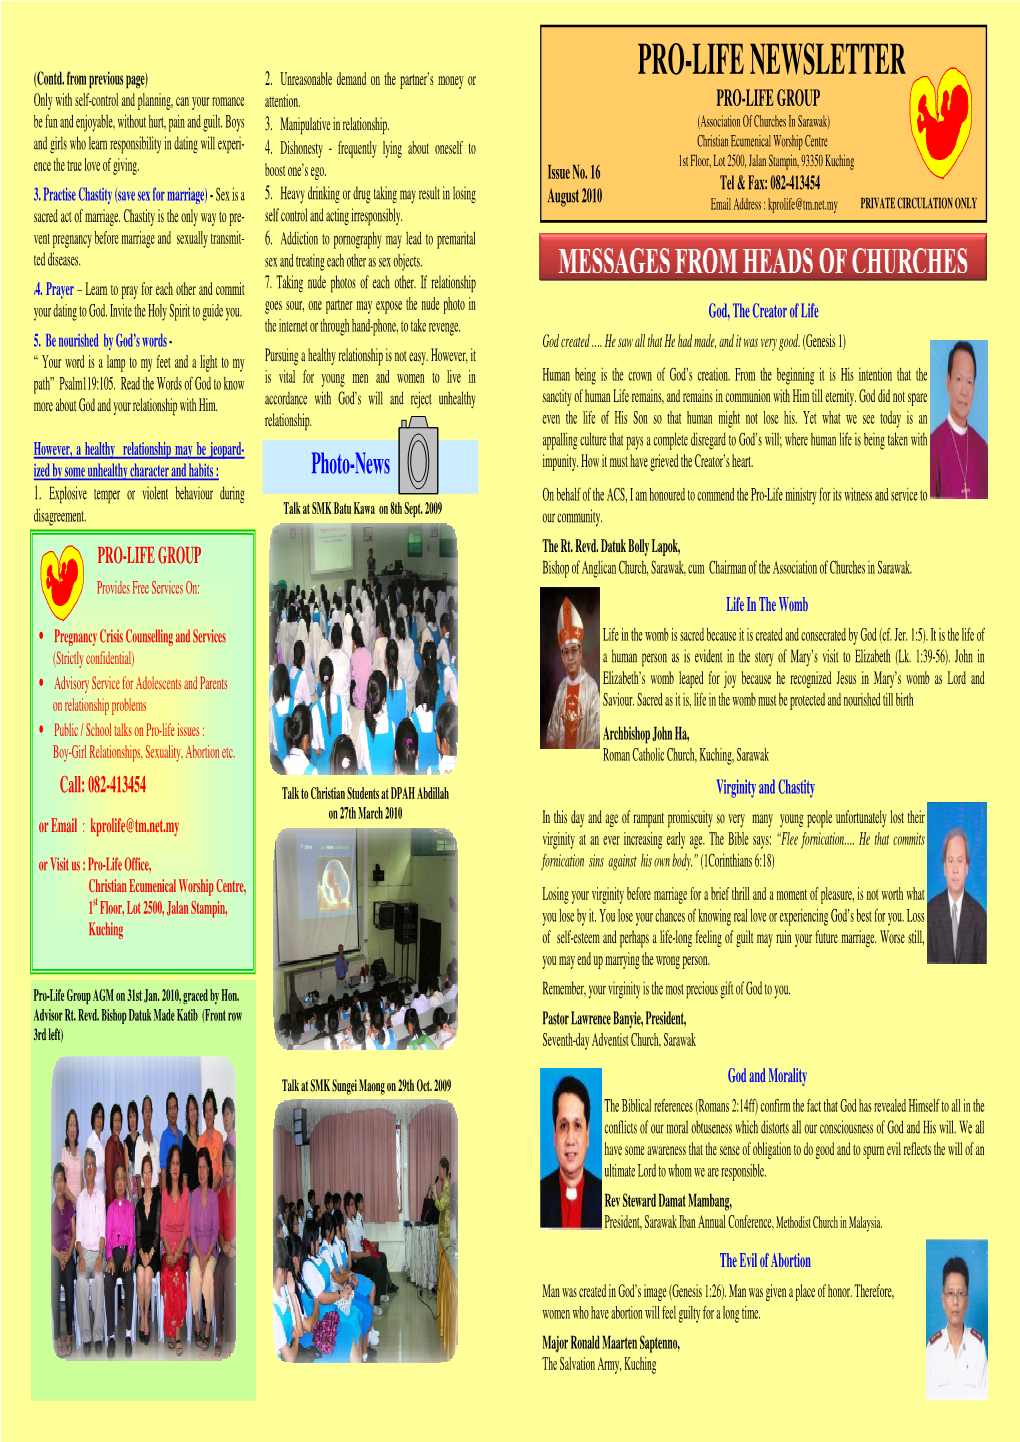 Pro-Life News Letter No. 16, August 2010